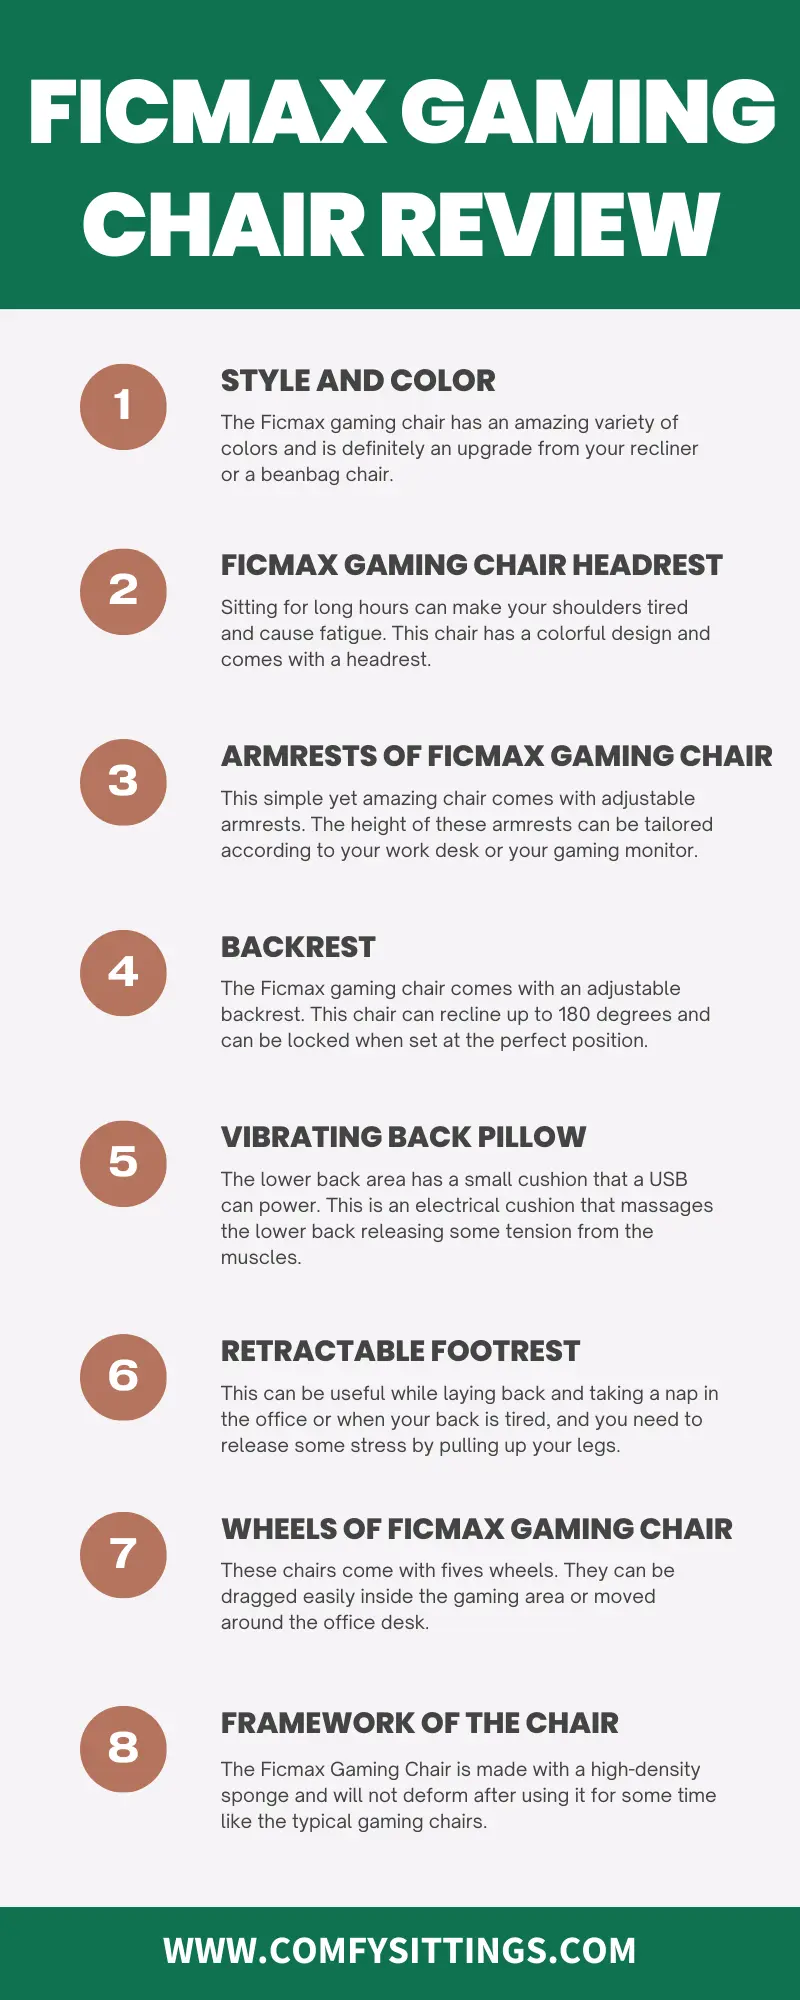 Ficmax Gaming Chair Features Review